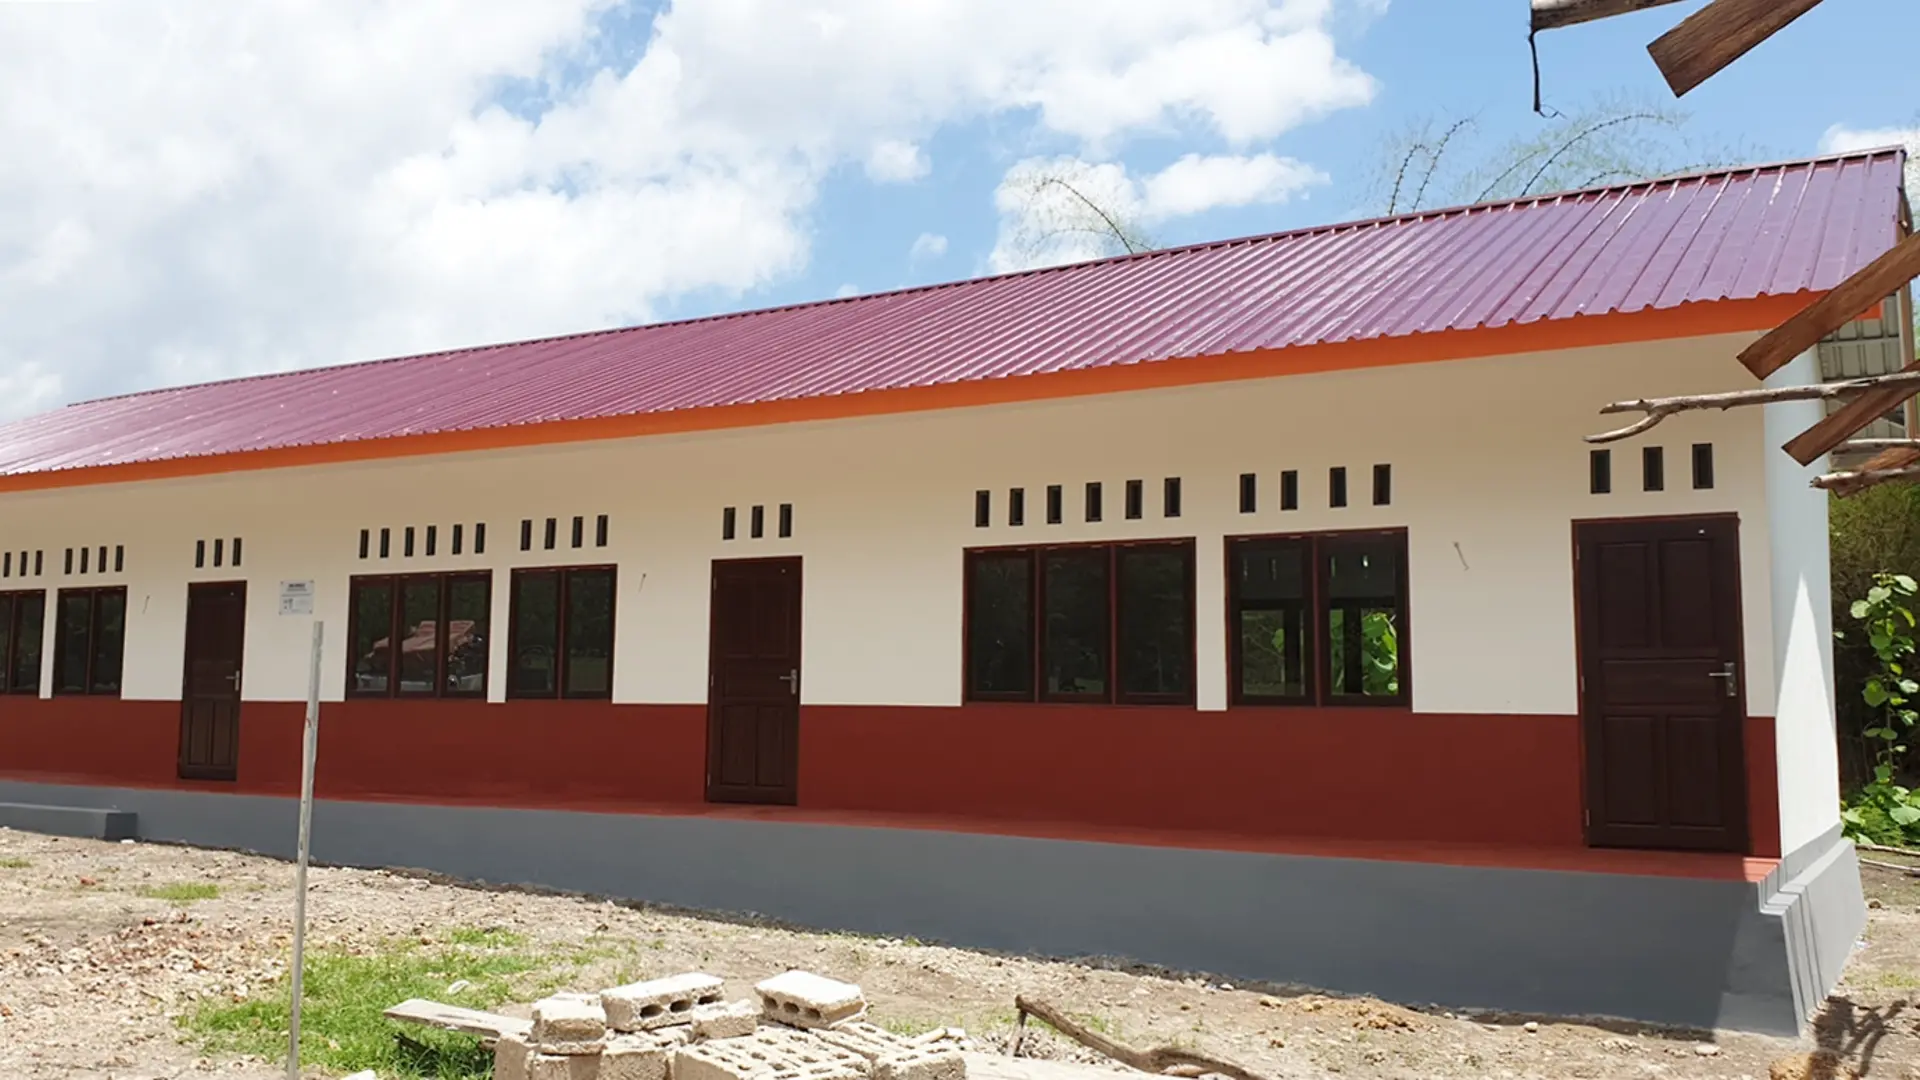 The new school building has a stronger structure and is built with sustainable materials. This will help to create a more conducive learning environment for the students.